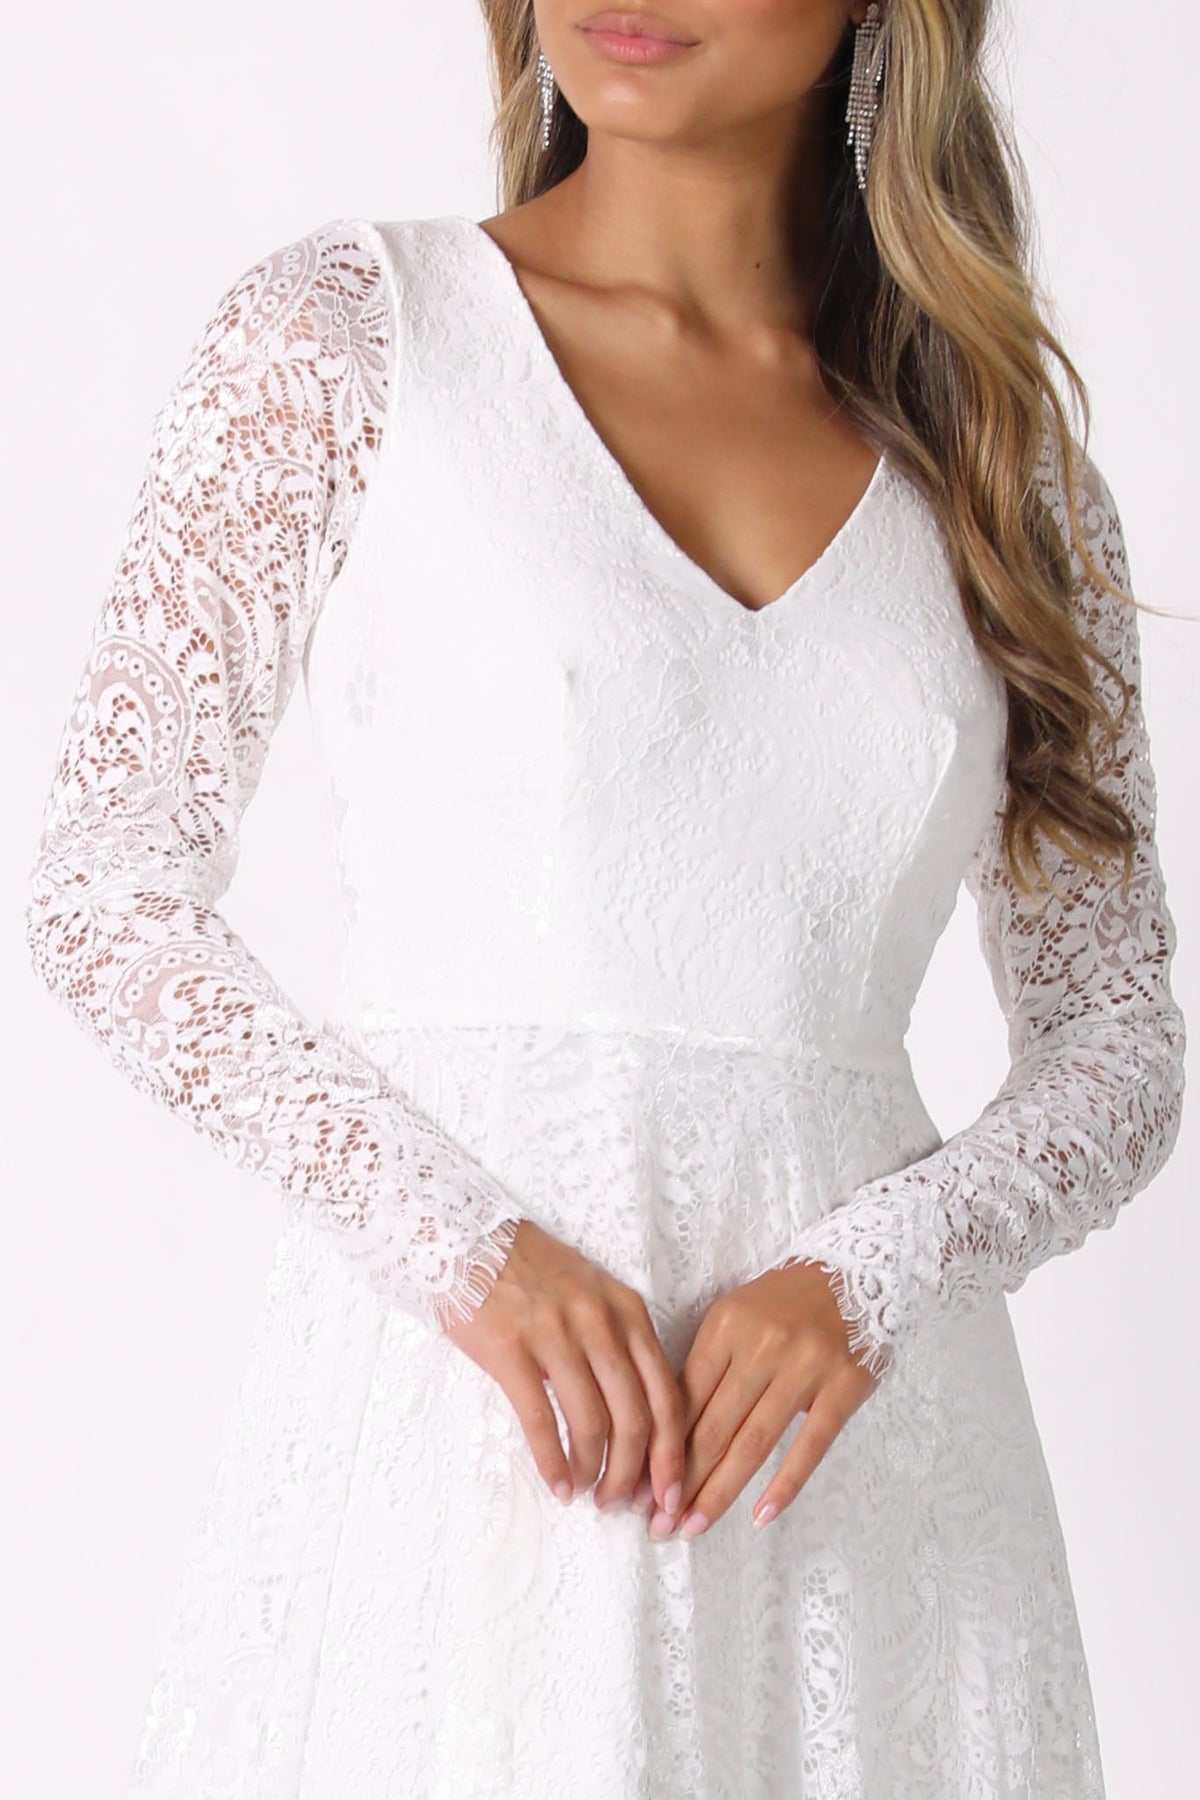 Close Up Image of Sheer 3 Dimensional Lace Sleeves of White Long Sleeve Lace Wedding Gown with V-Neck, Sheer Lace Fitted Sleeves, A-Line Skirt and Sweep Train